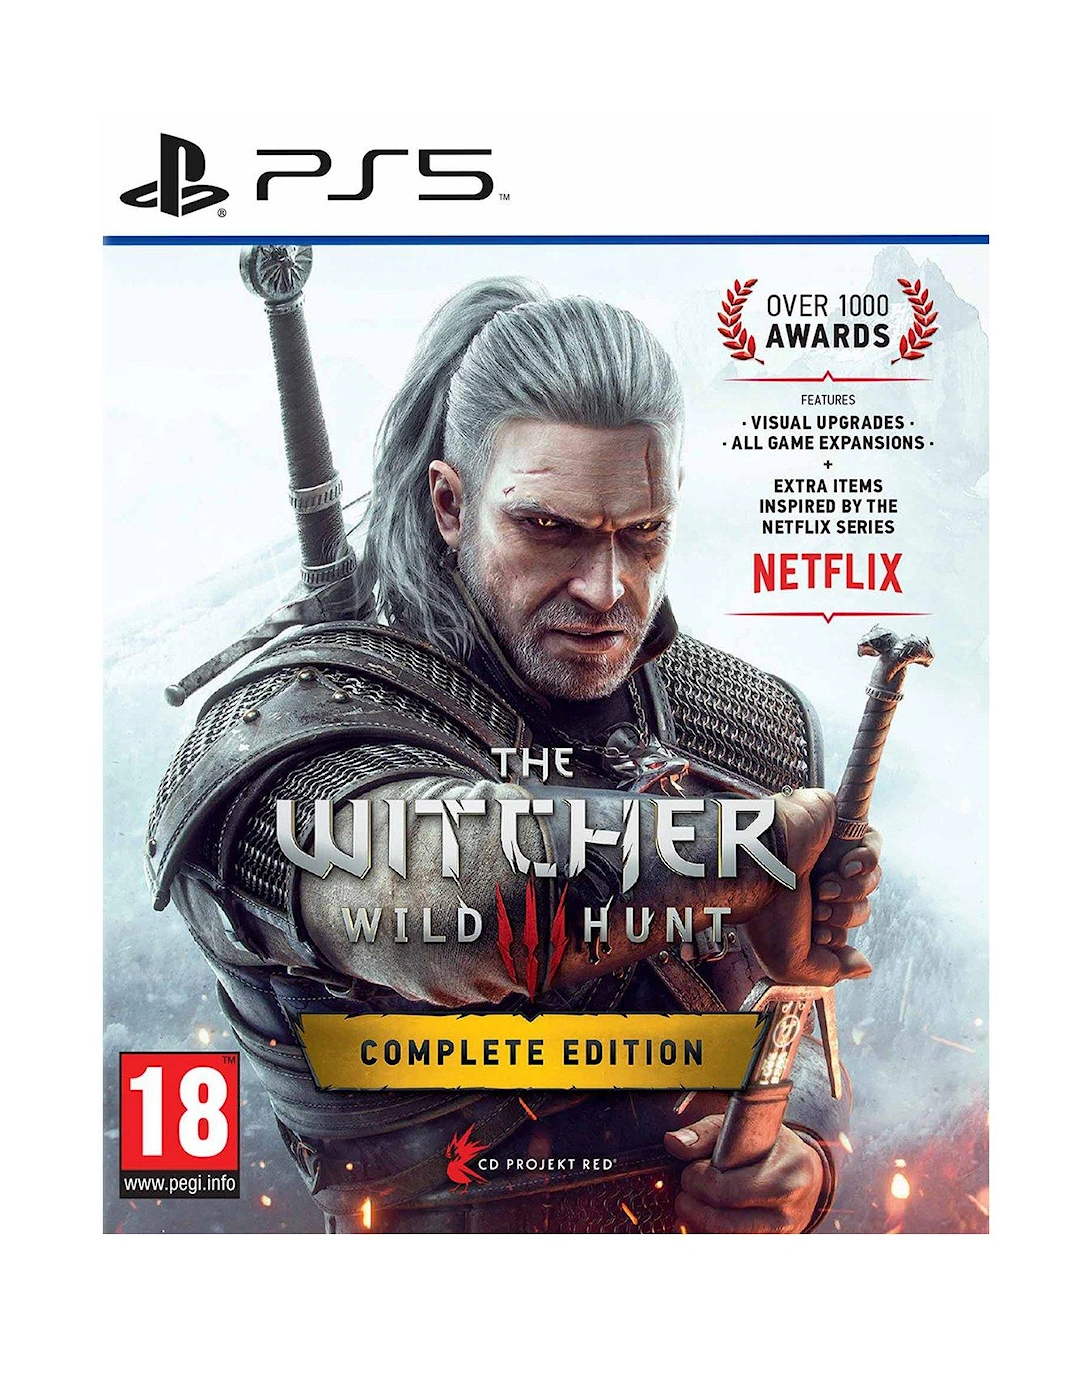 Playstation The Witcher 3: Wild Hunt - Complete Edition, 3 of 2